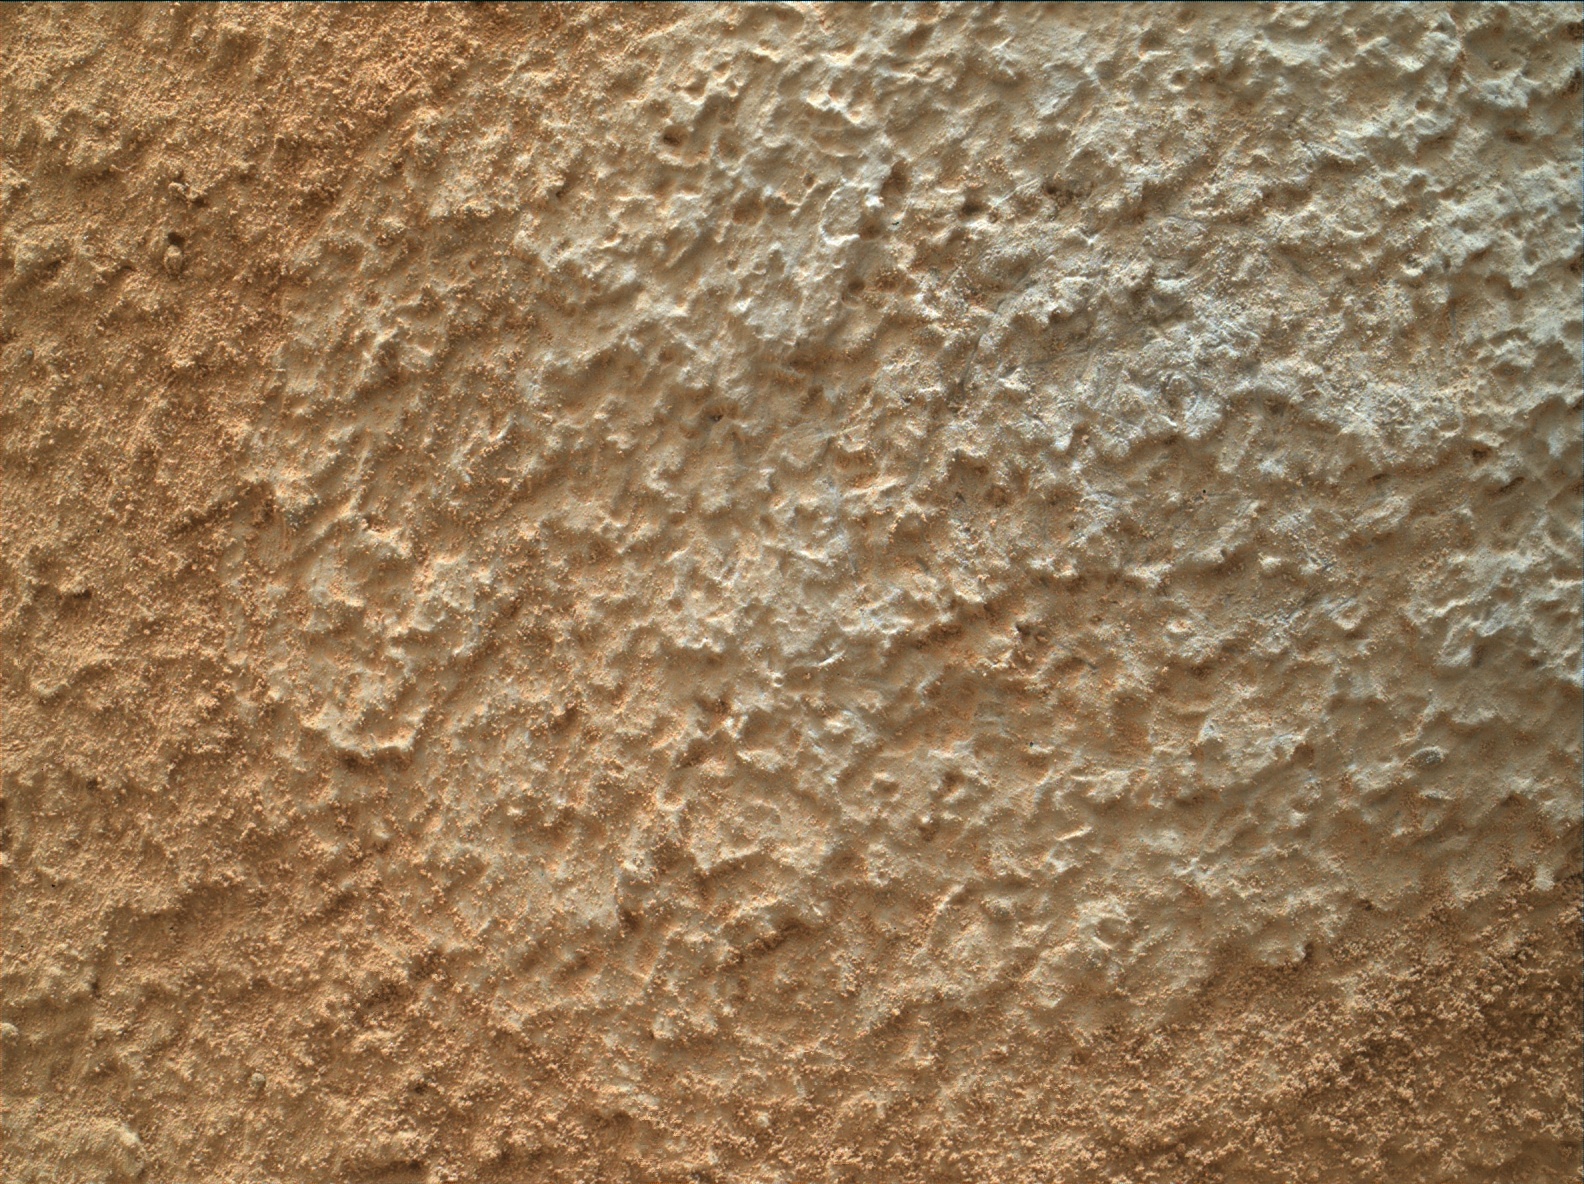 Nasa's Mars rover Curiosity acquired this image using its Mars Hand Lens Imager (MAHLI) on Sol 824